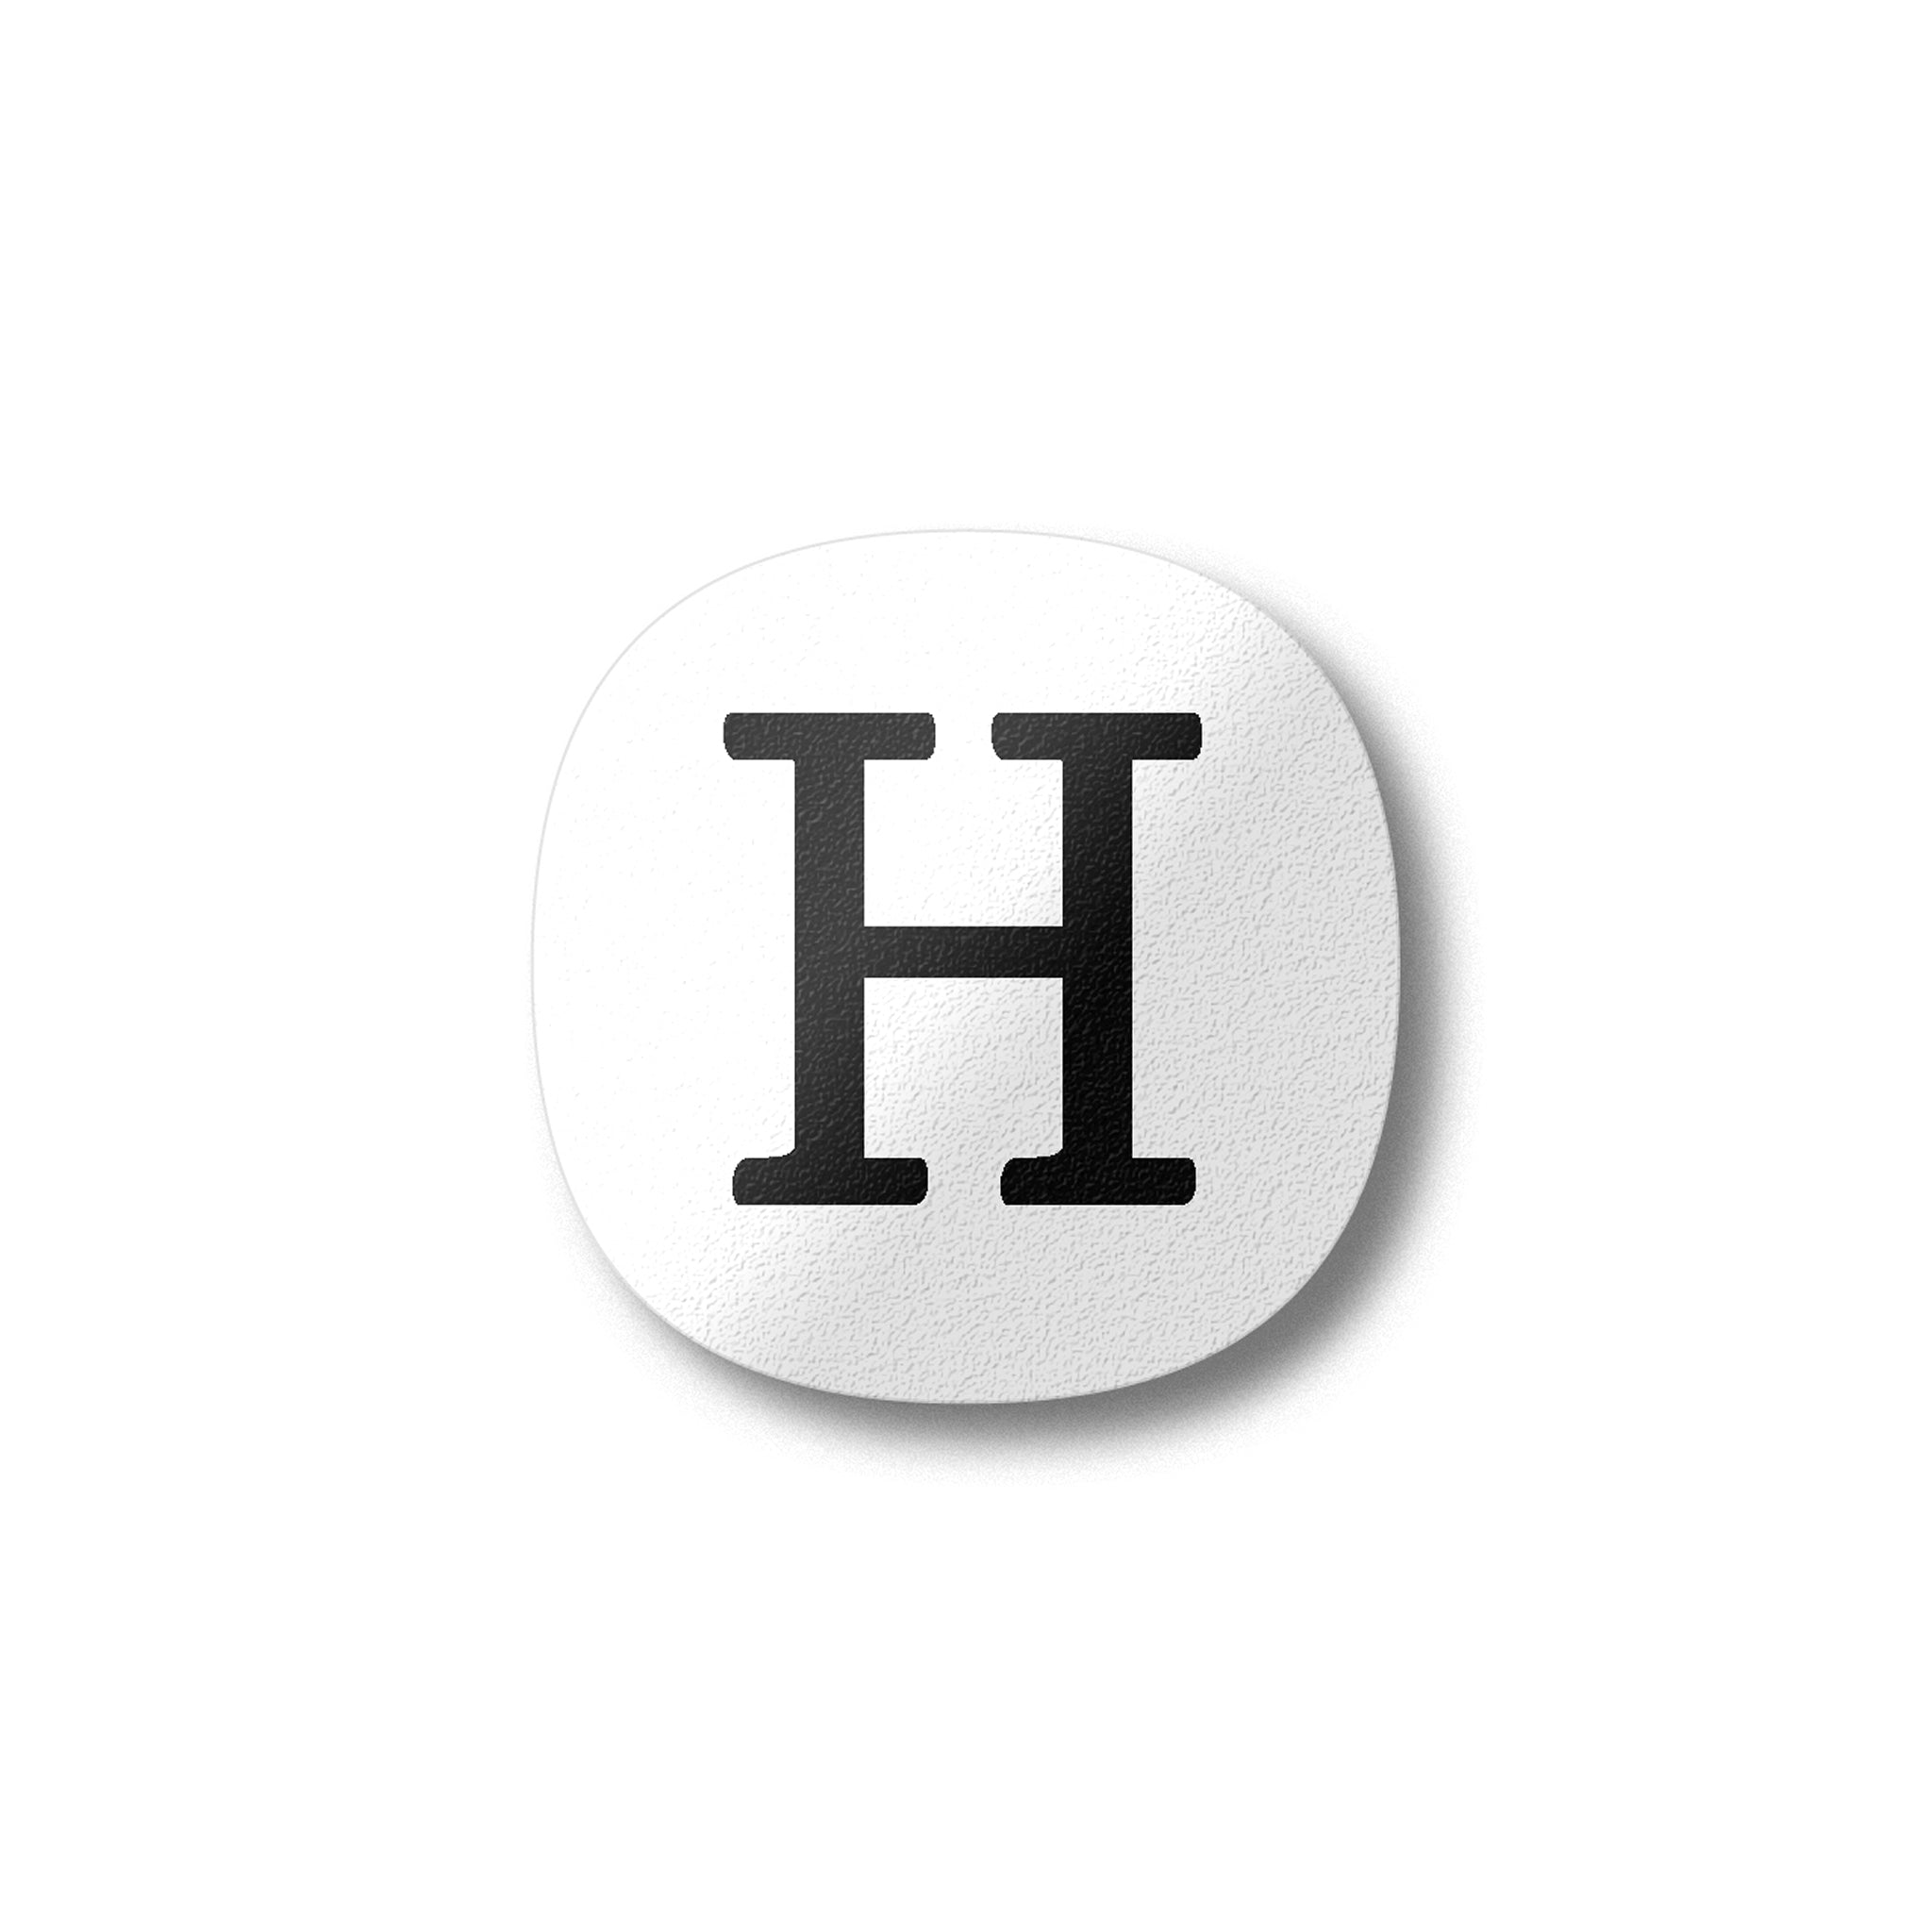 A white magnet with a black letter H plywood fridge magnet by Beyond the Fridge